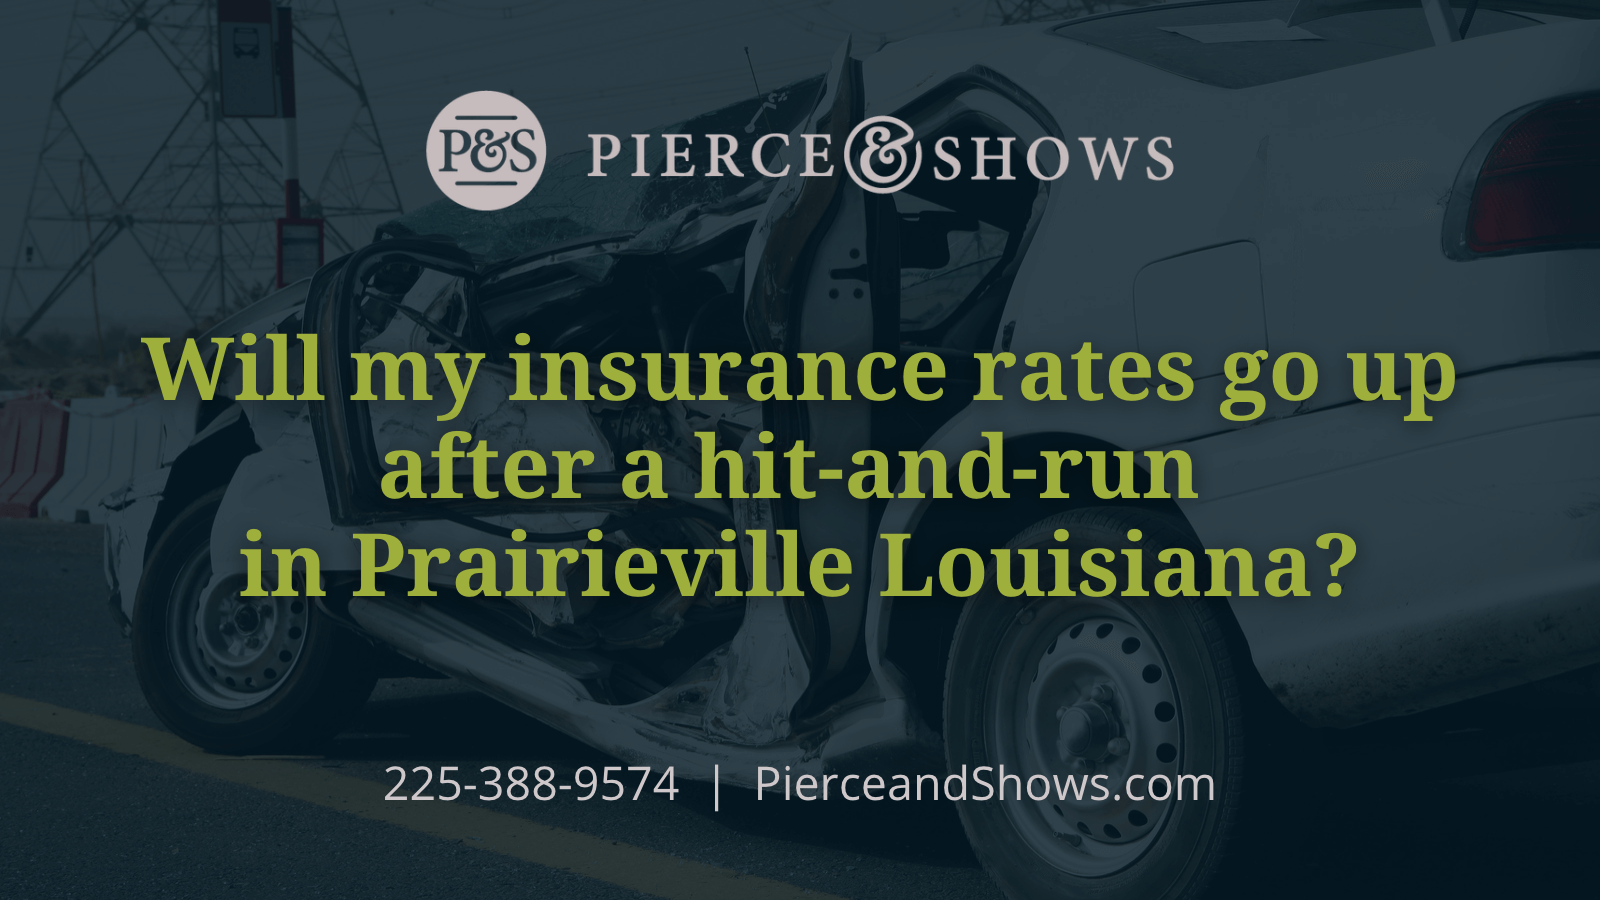 Will my insurance rates go up after a hit-and-run in Prairieville louisiana - Baton Rouge Louisiana injury attorney Pierce & Shows